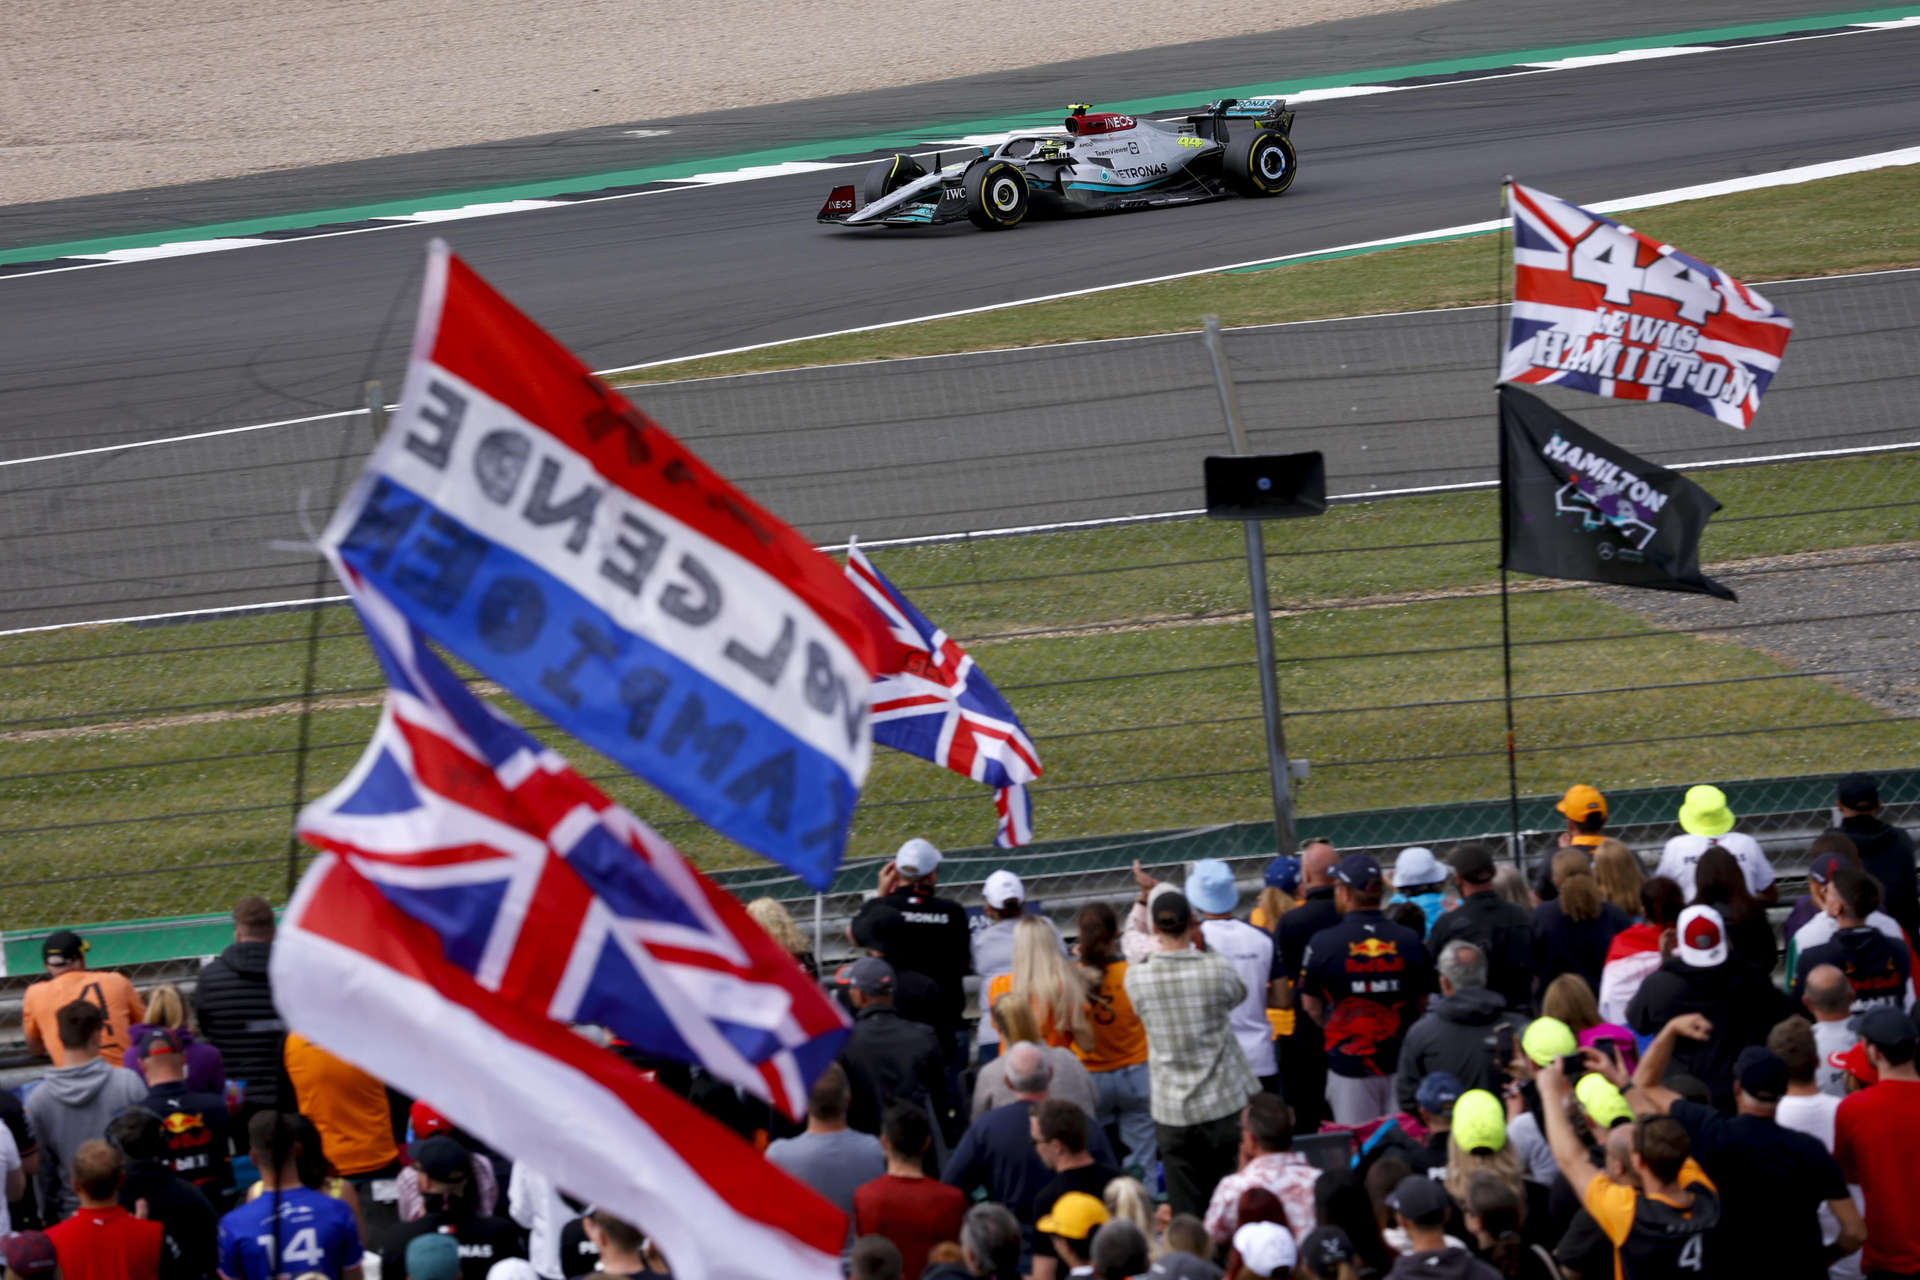 The UK's Silverstone has gone on to be one of the most revered tracks in motorsport